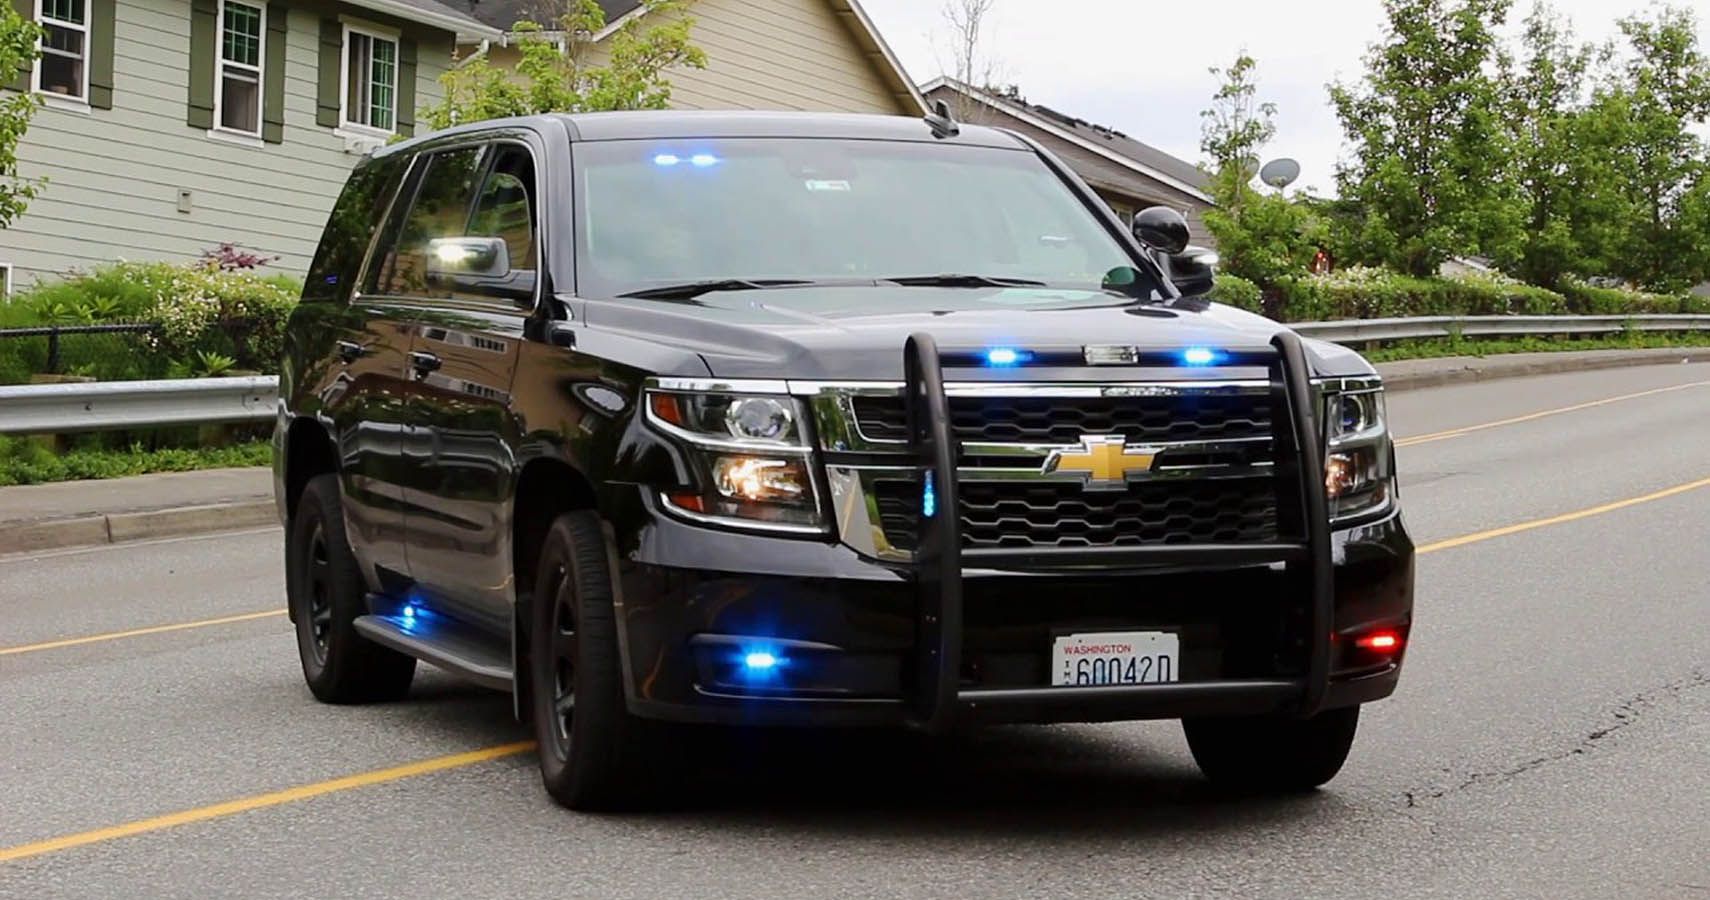 9 Ways To Spot Unmarked Police Cars